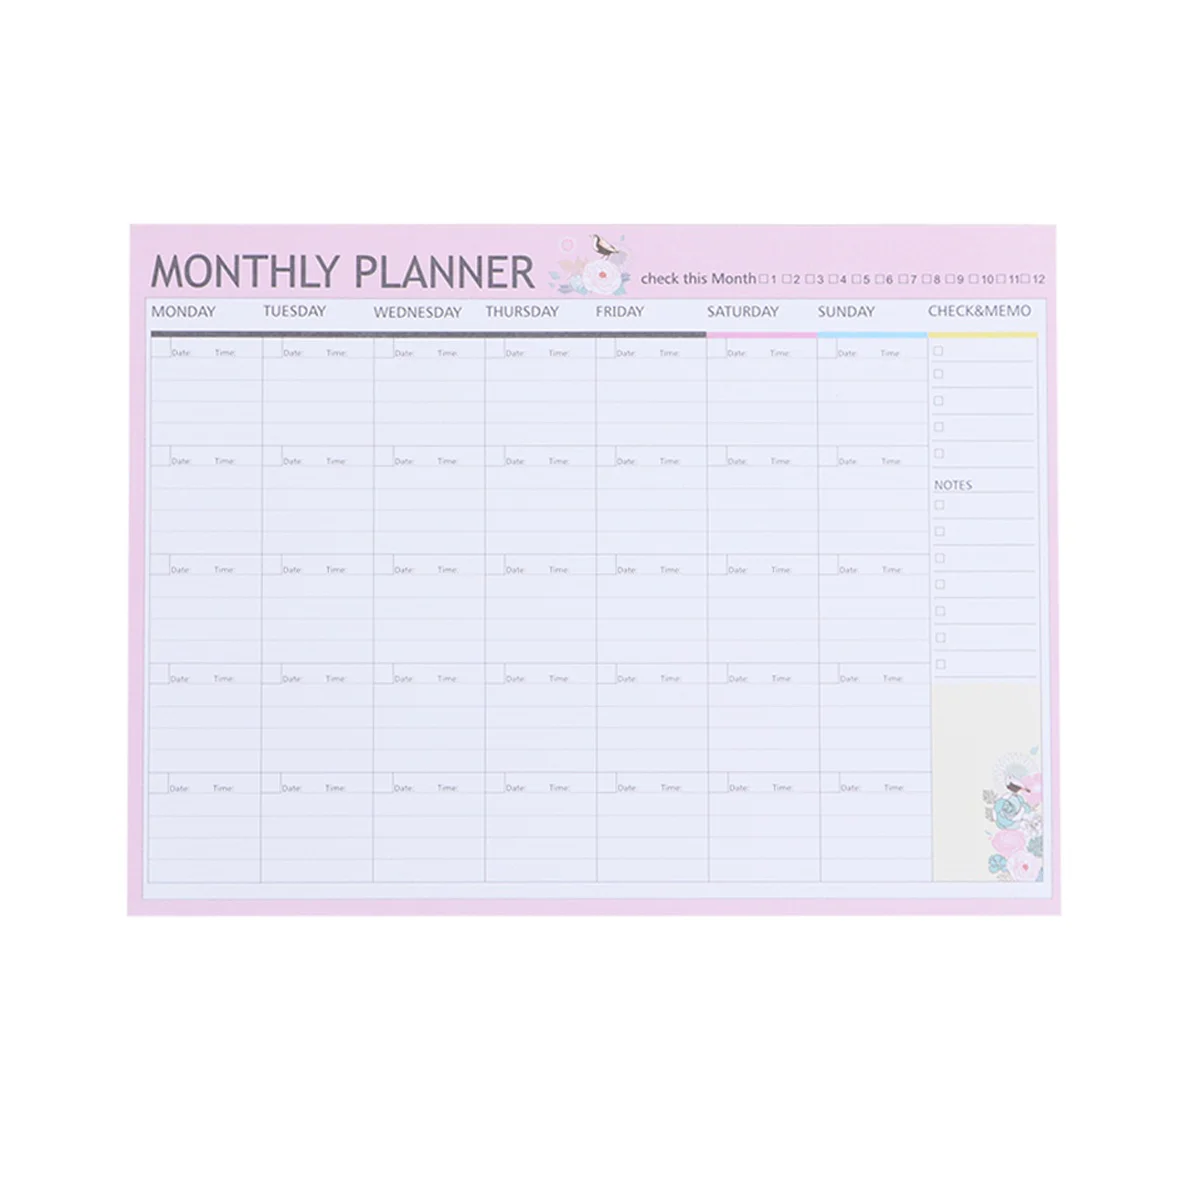 Monthly Planner A4 Decorative Organizer Calendar Schedule Notebook Candy Weekly Daily Planner Memo Pad(Random Color)